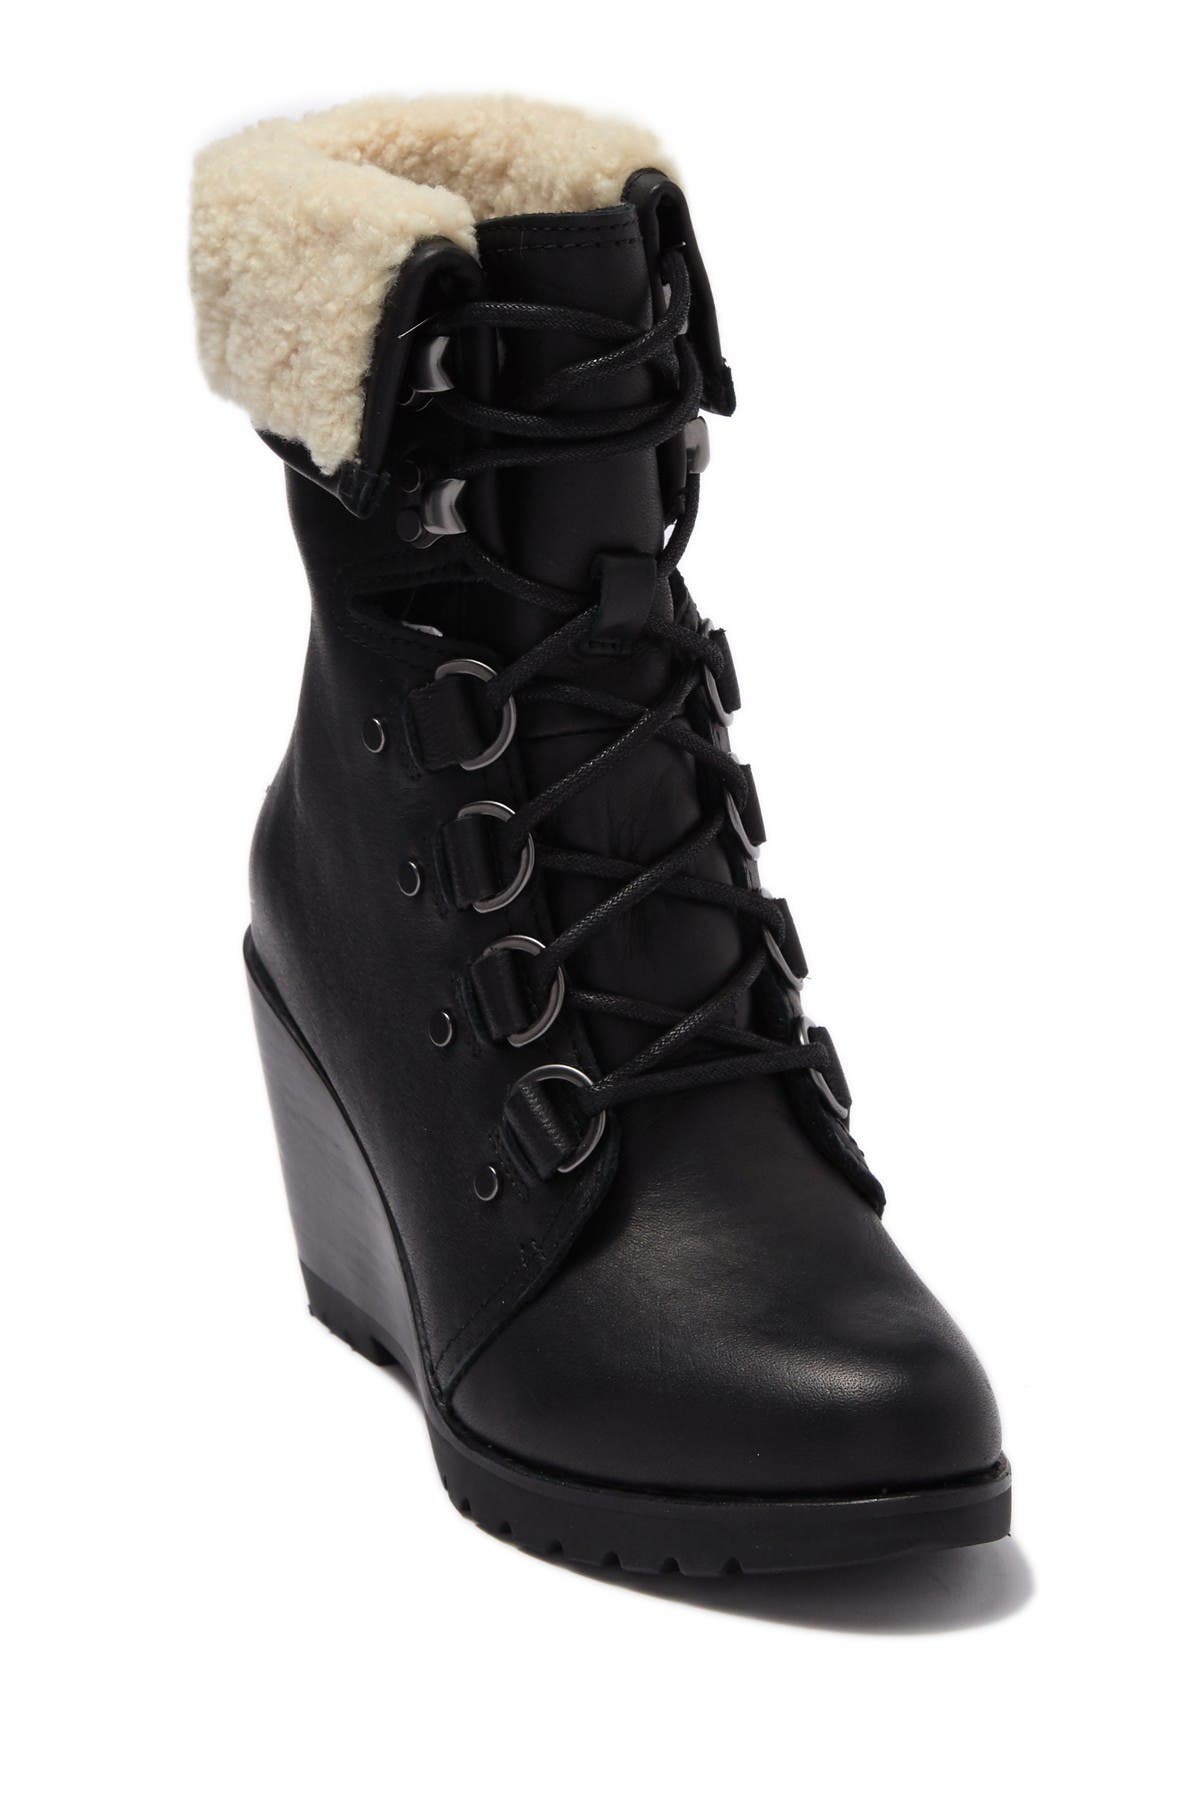 sorel after hours lace